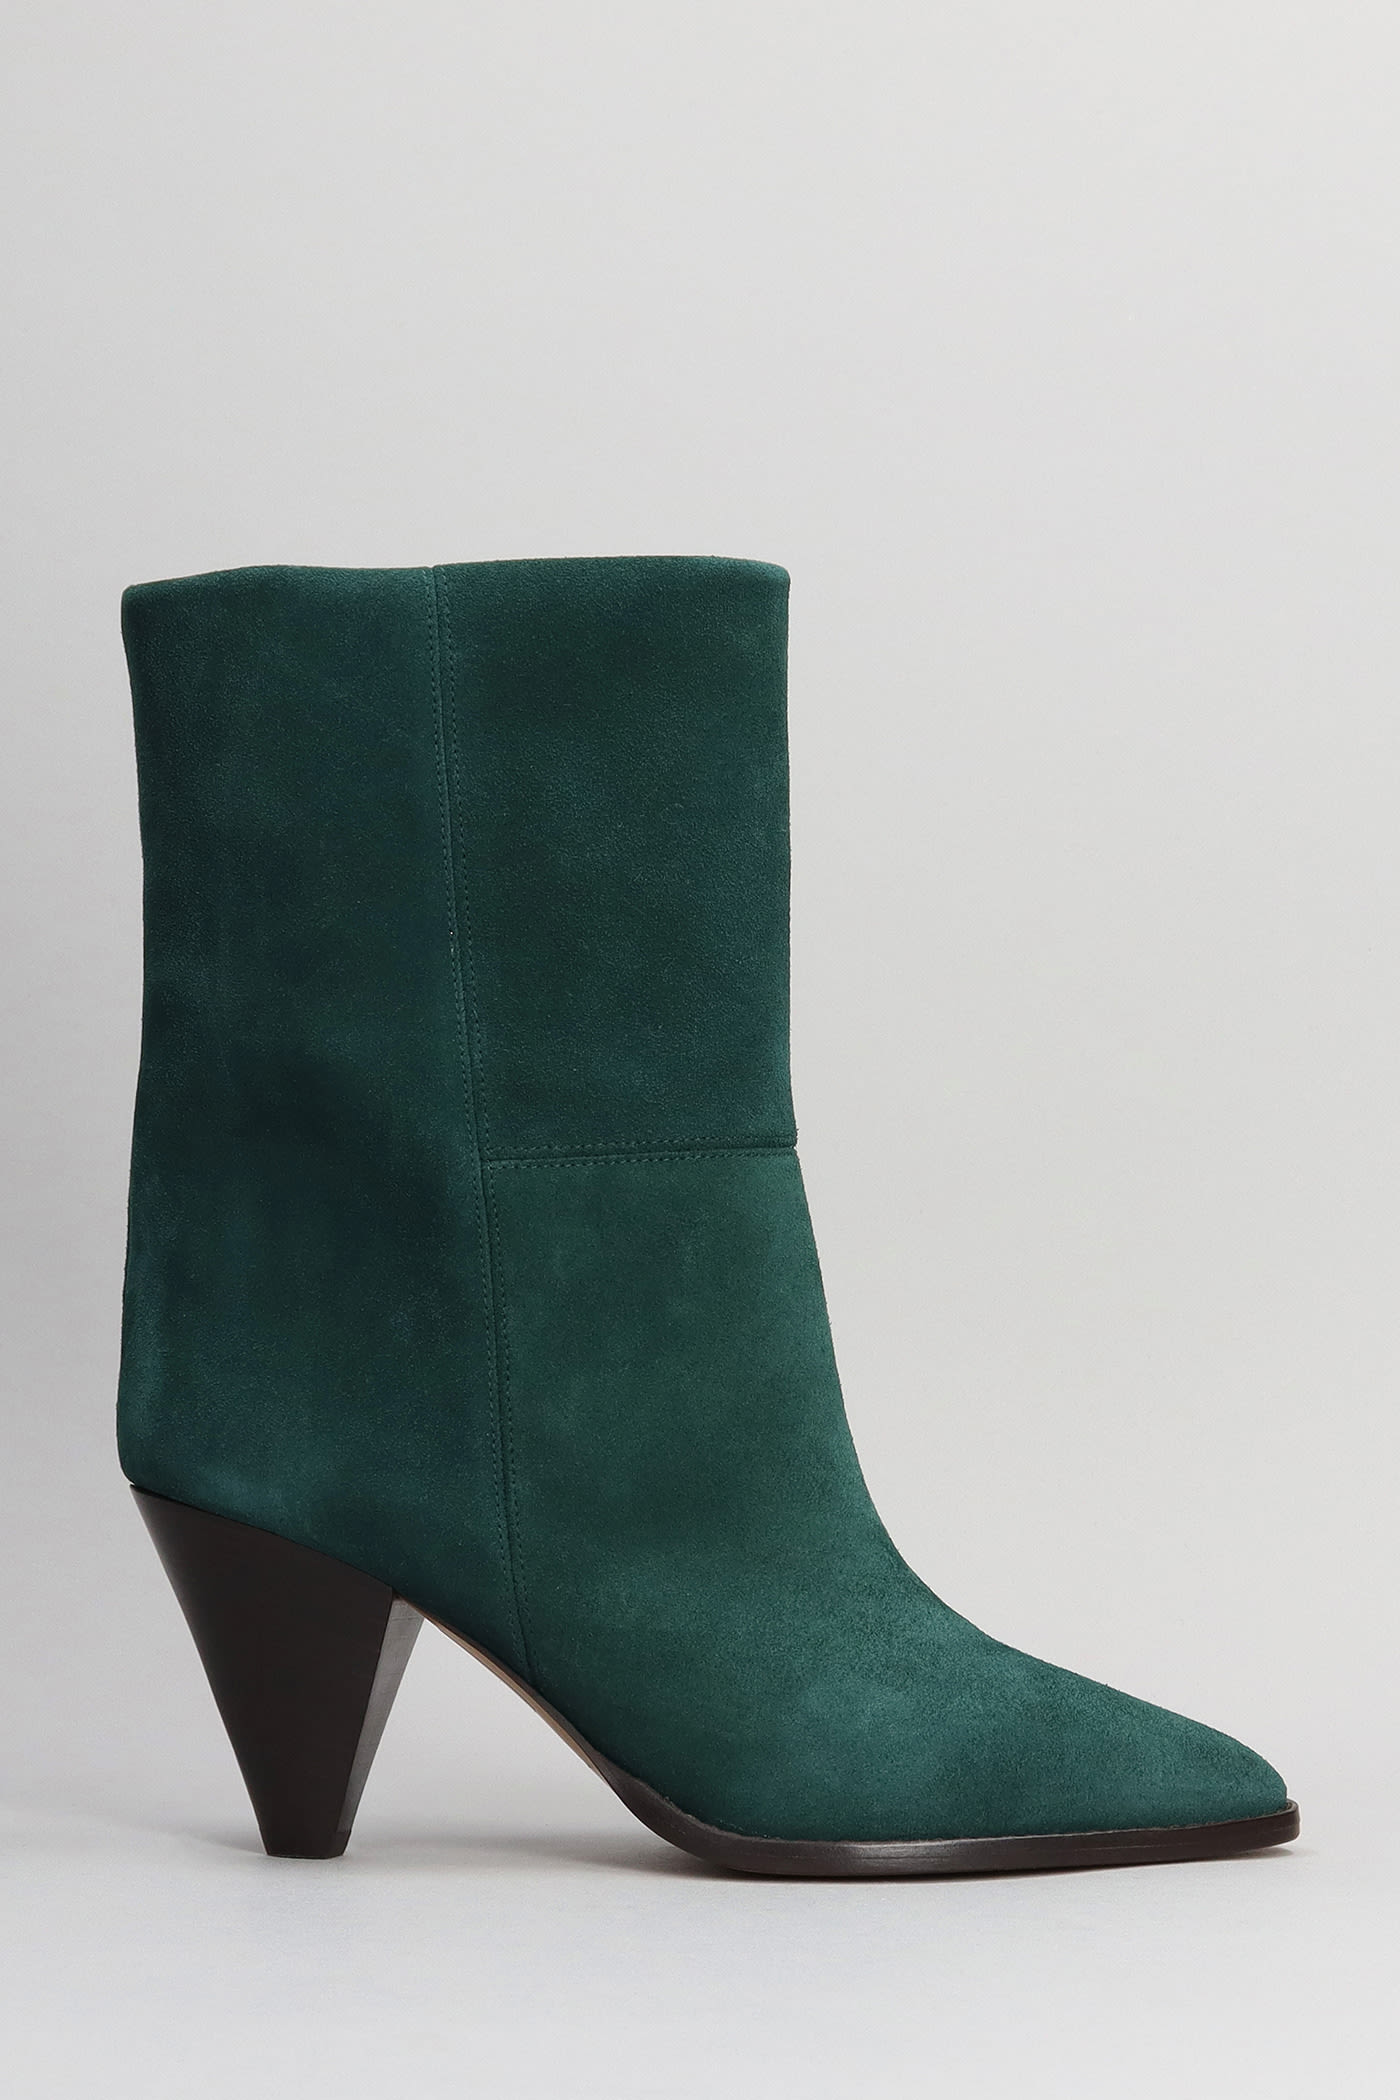 Rouxa High Heels Ankle Boots In Green Suede